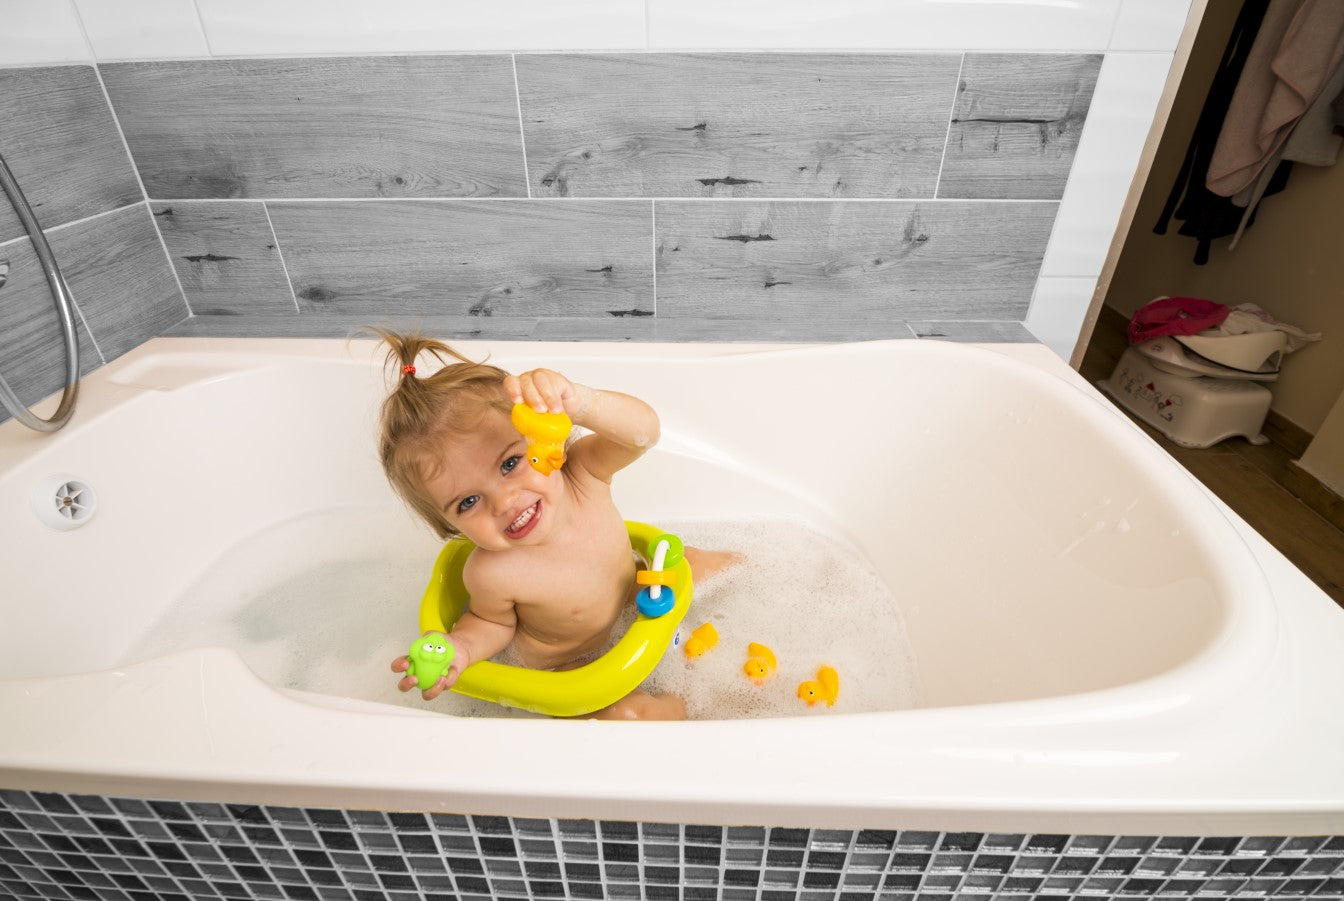 Euro Baby PANDA bath ring with toys - ergonomic design, suction cup stability, and colorful wheel toy, perfect for babies 7 months and up. Available in South Africa with CB Baby.